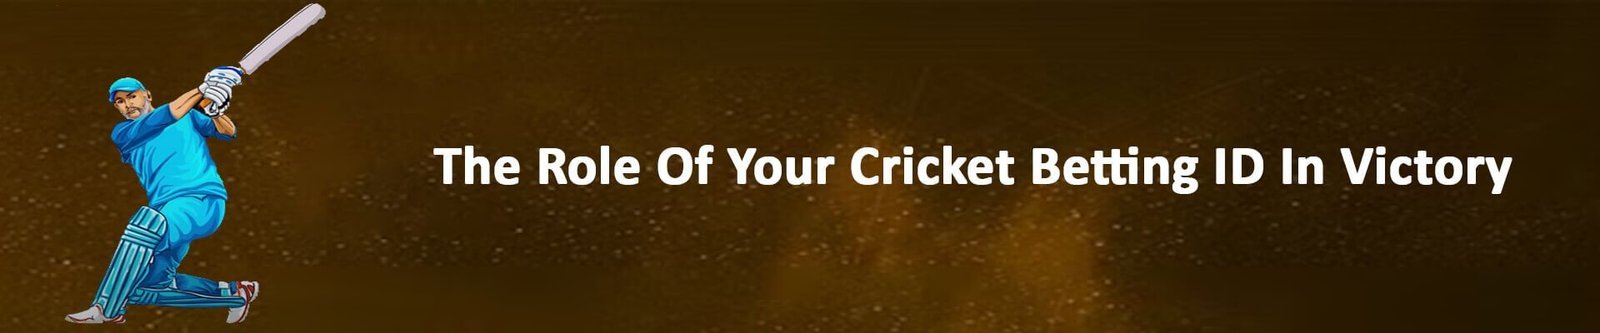 The Role Of Your Cricket Betting ID In Victory